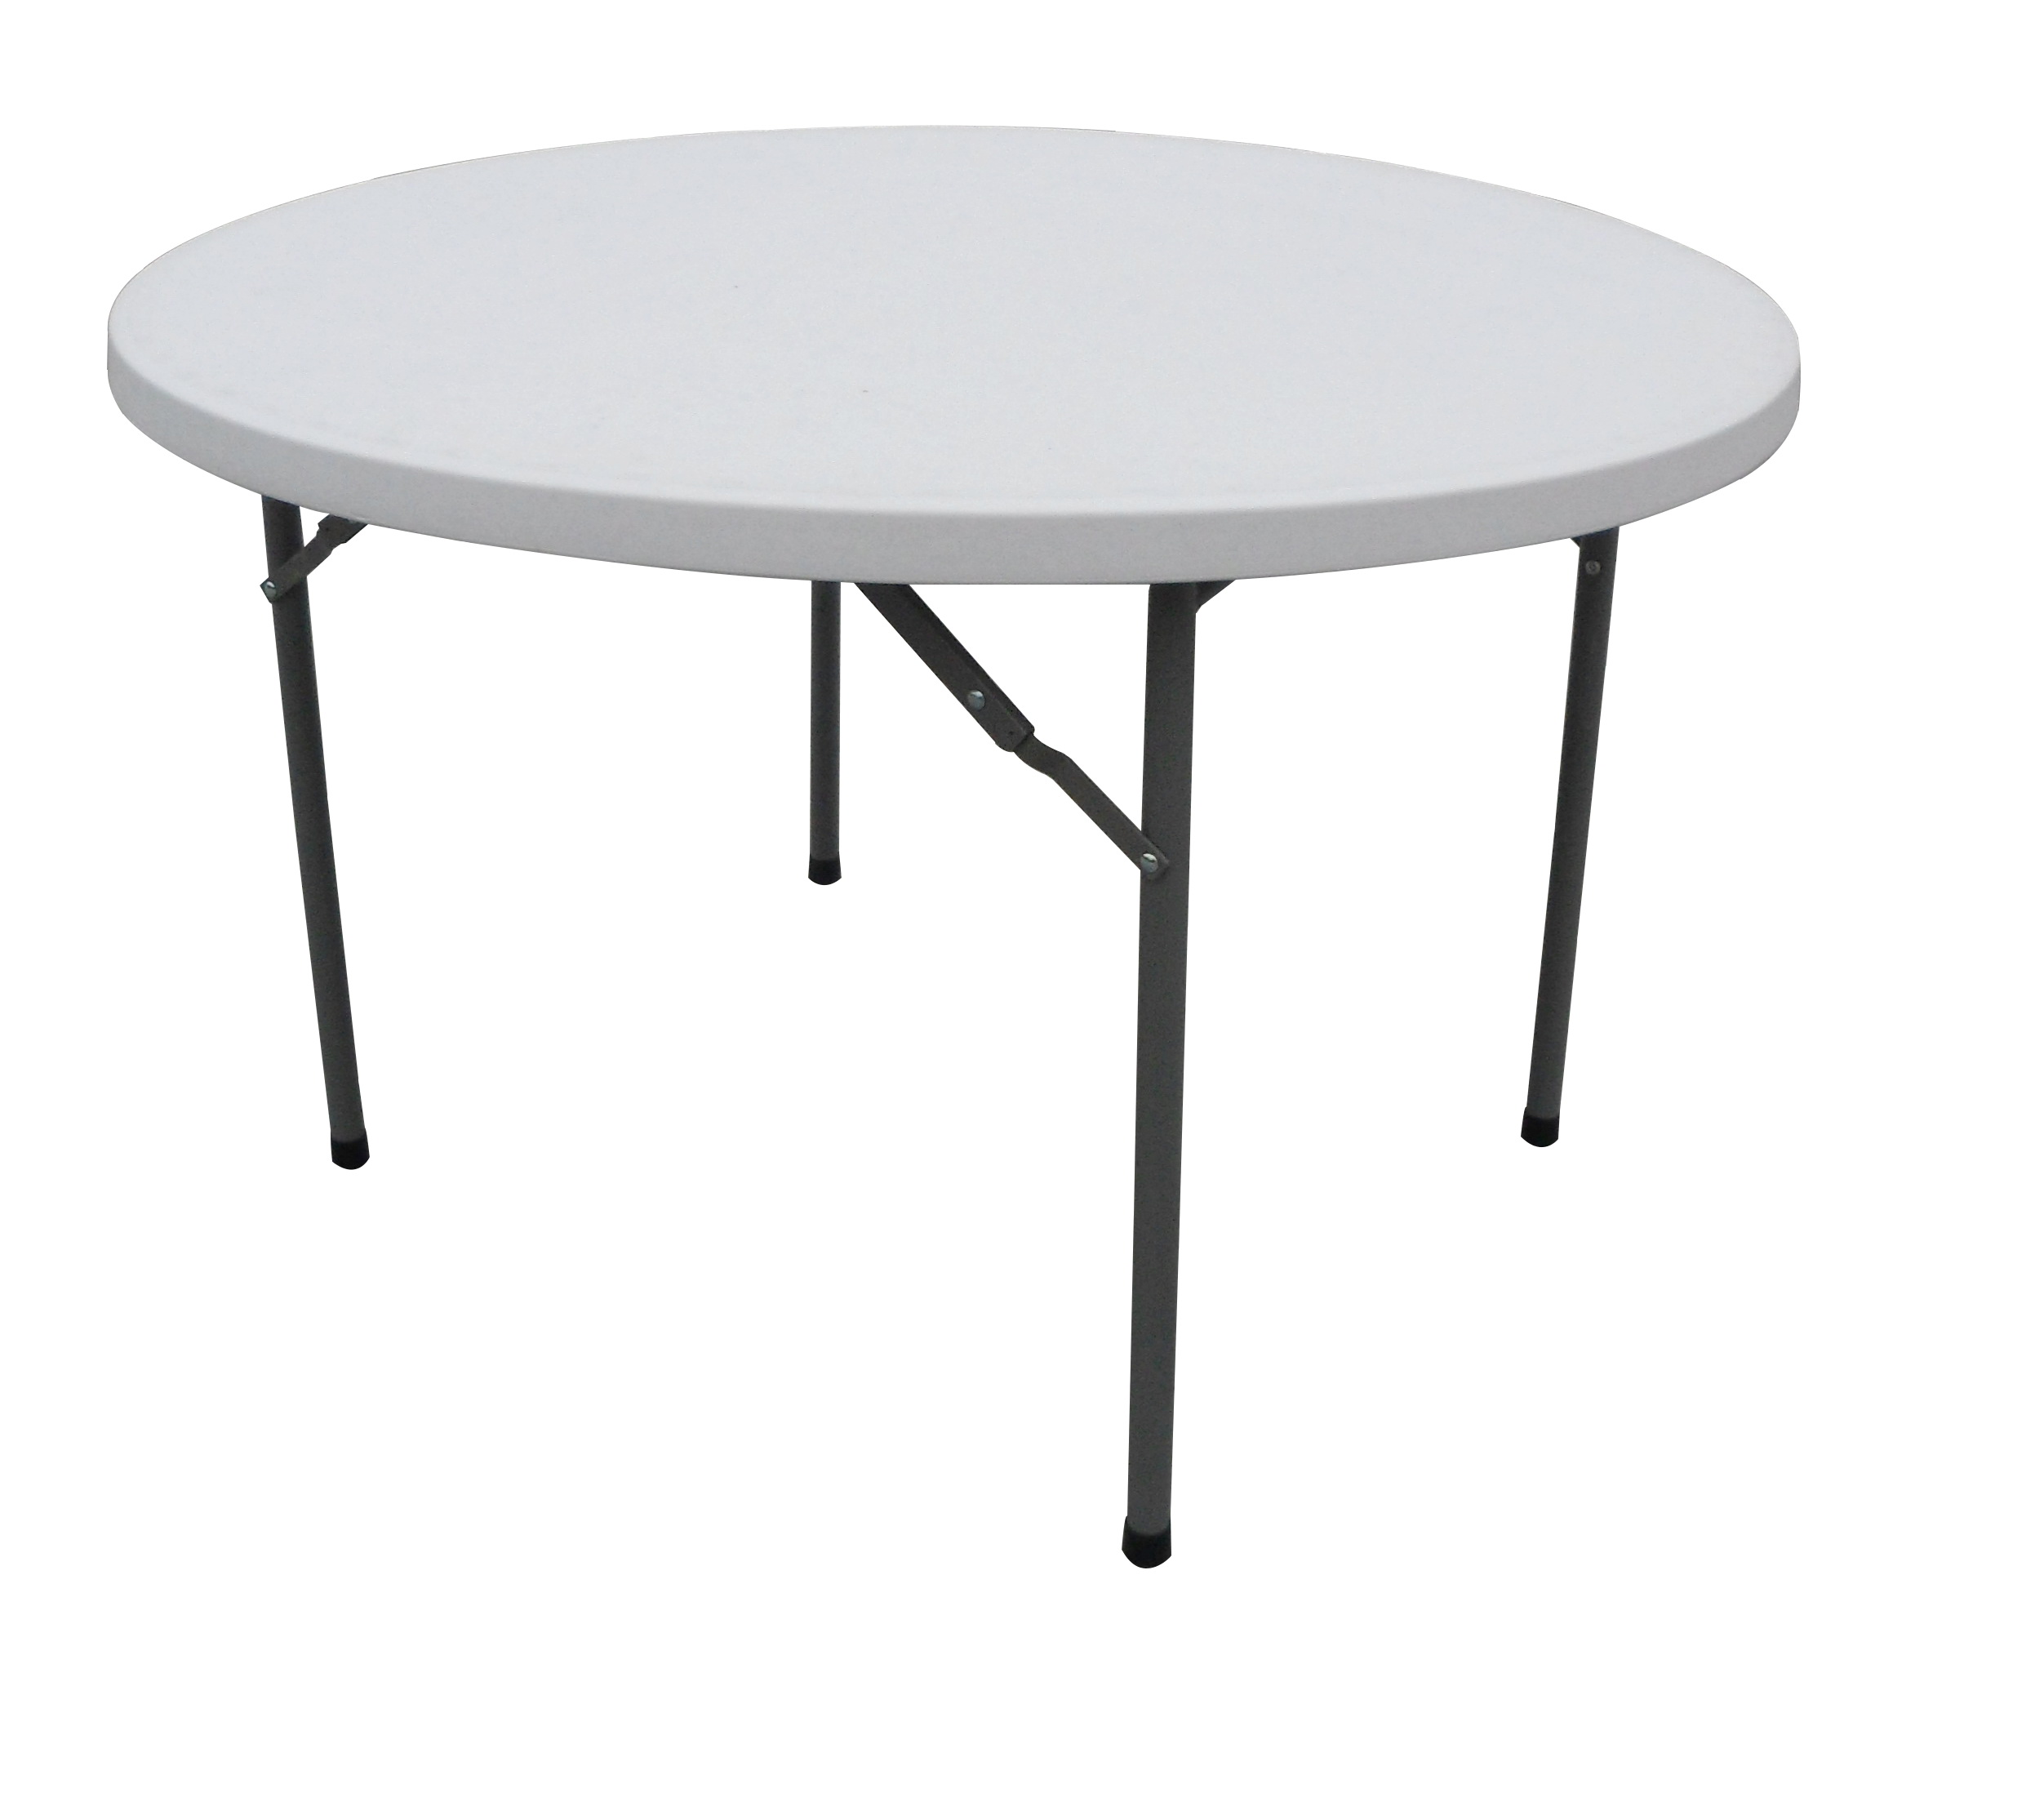 SUPERLIVING MONTANA FOLDING ROUND TABLE 122X74CM